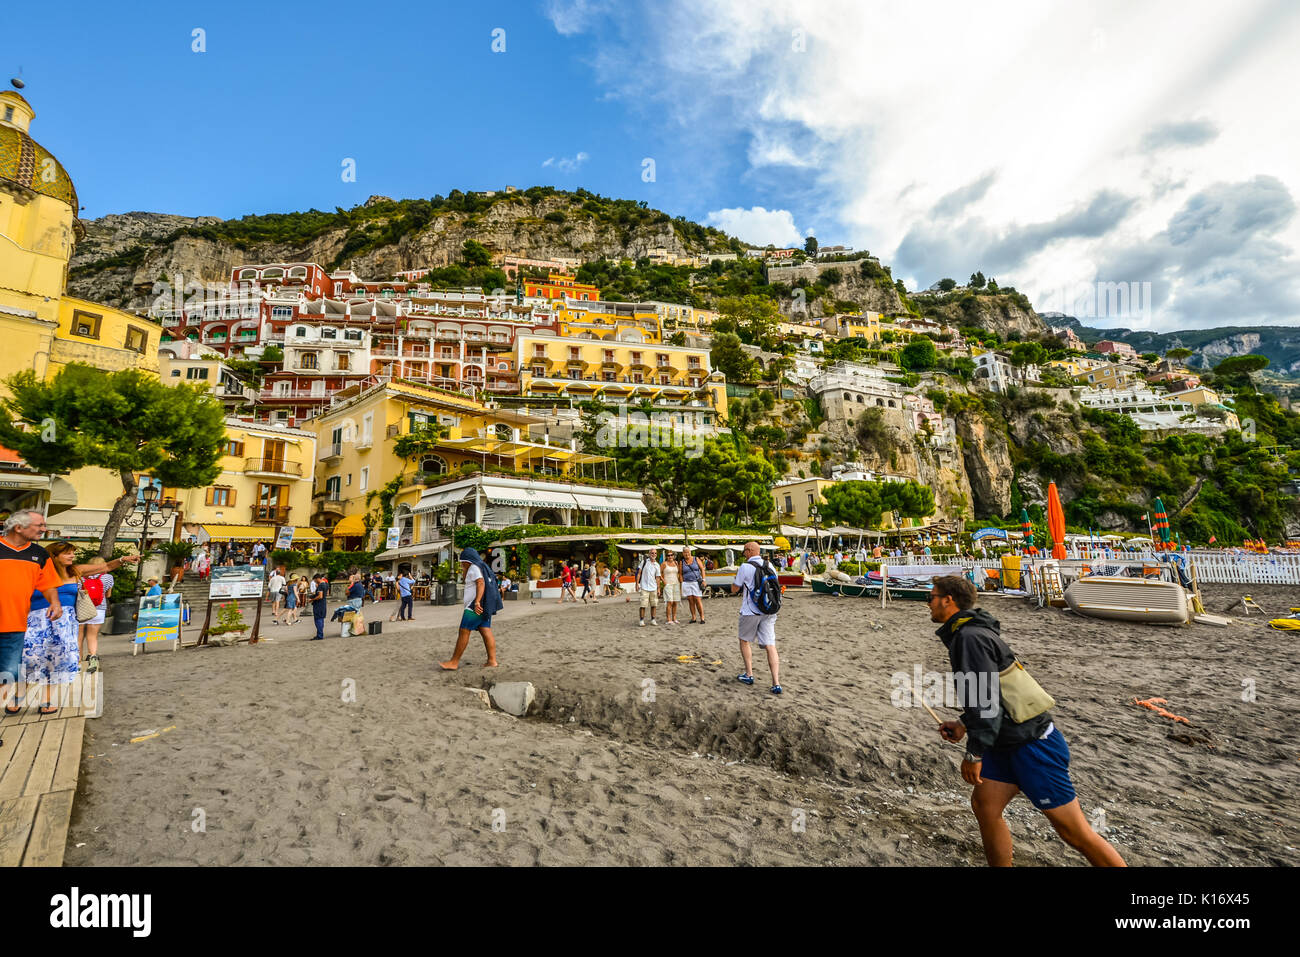 Summer day at the sandy beach of Positano Italy on the Amalfi Coast as tourists enjoy the coastal cafes and shops Stock Photo